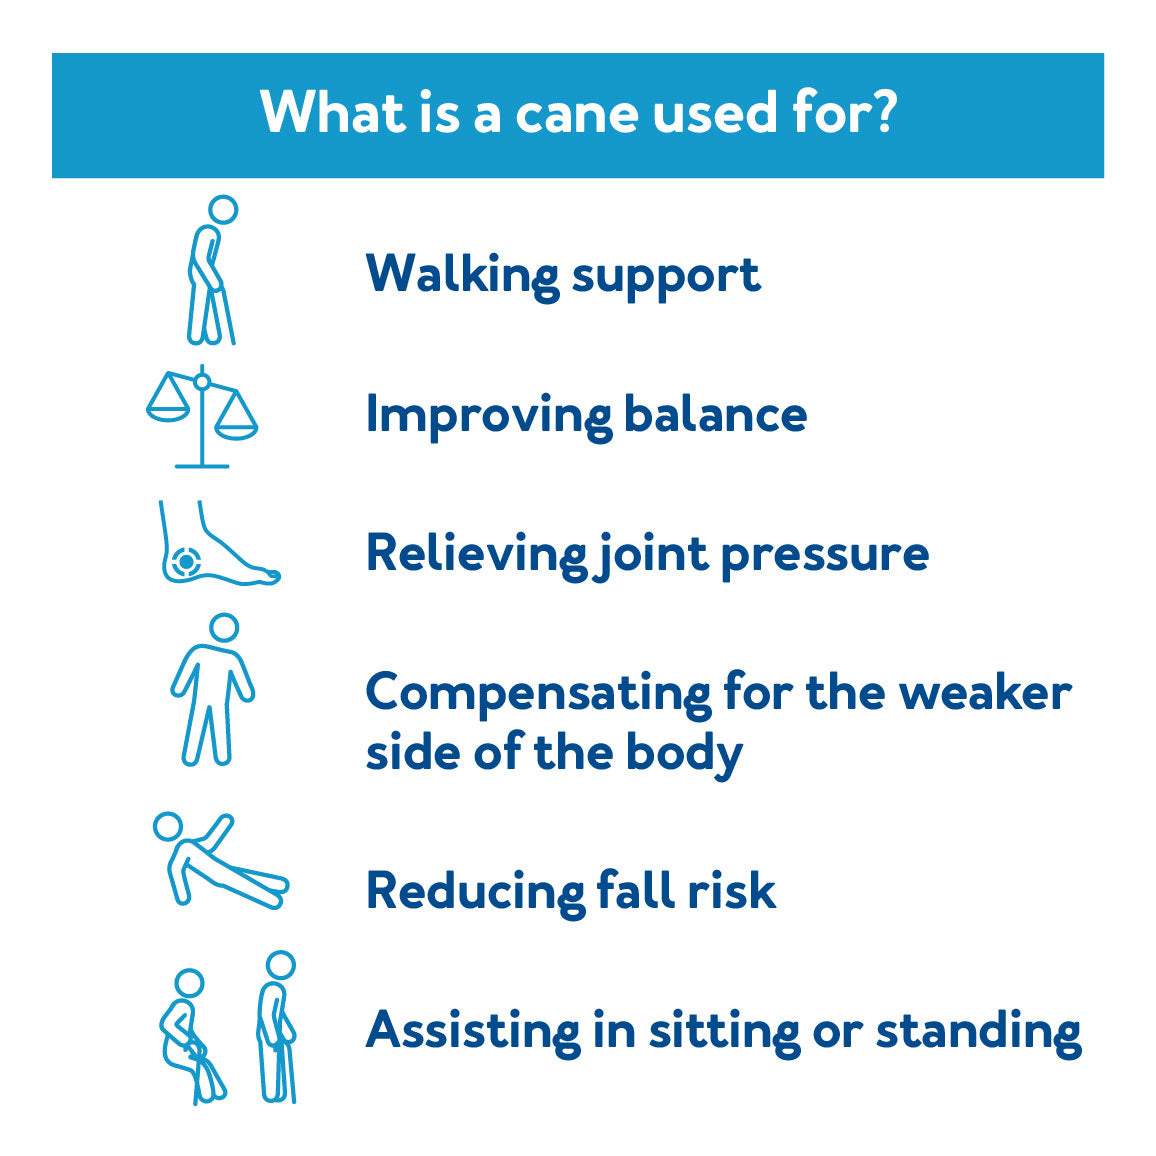 What is a Cane Used for? Walking support, improving balance, relieving joint pressure, compensating for the weaker side of the body, reducing fall risk, assisting in sitting or standing